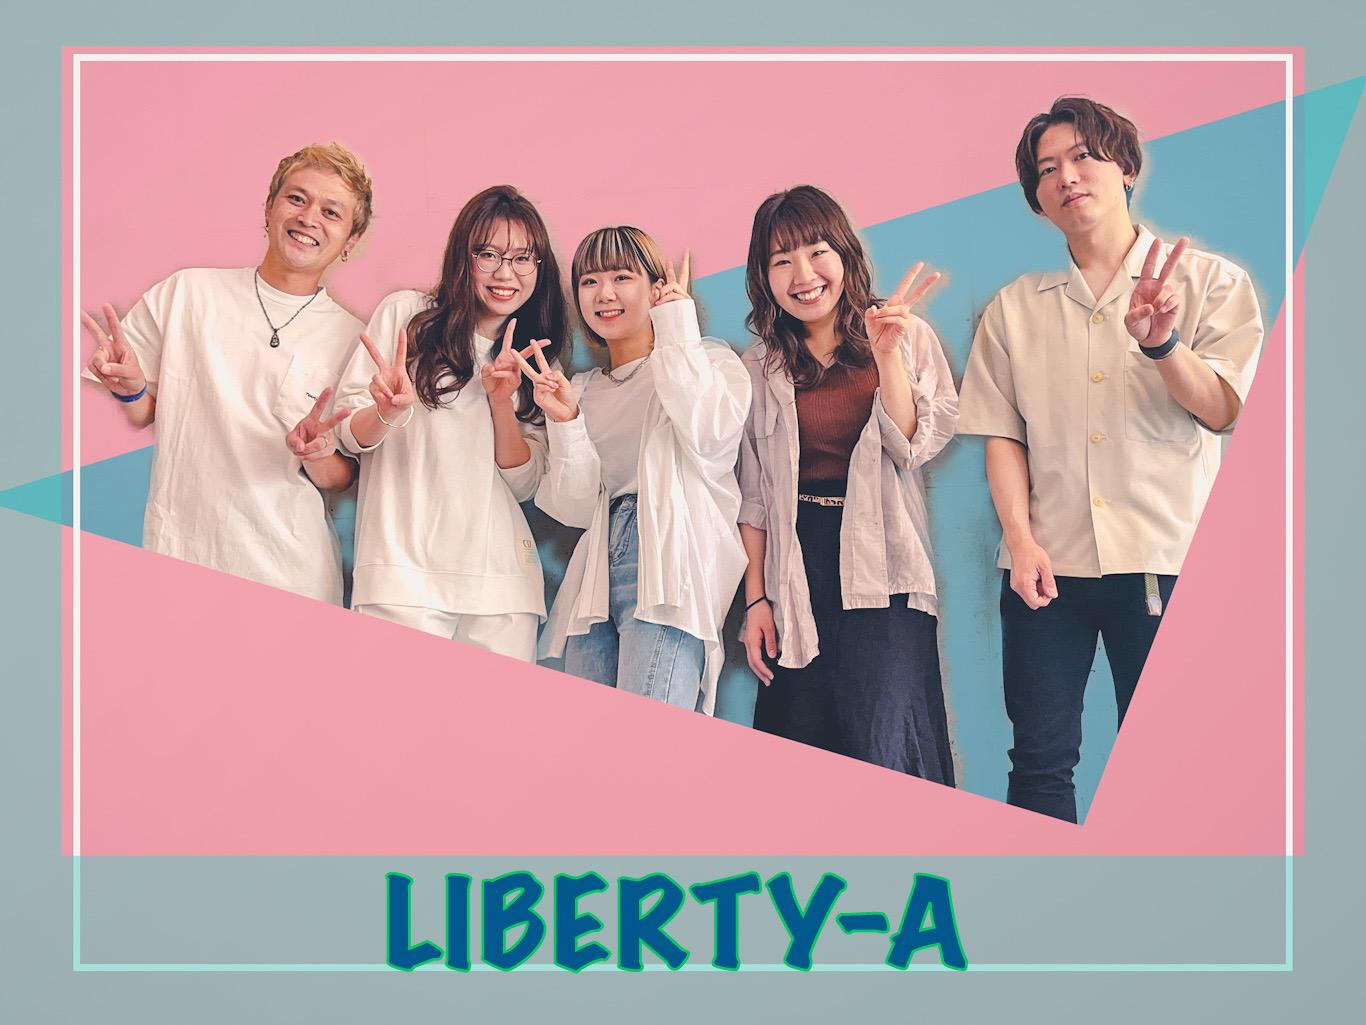 LIBERTY-A 西大島店スタイリスト募集！